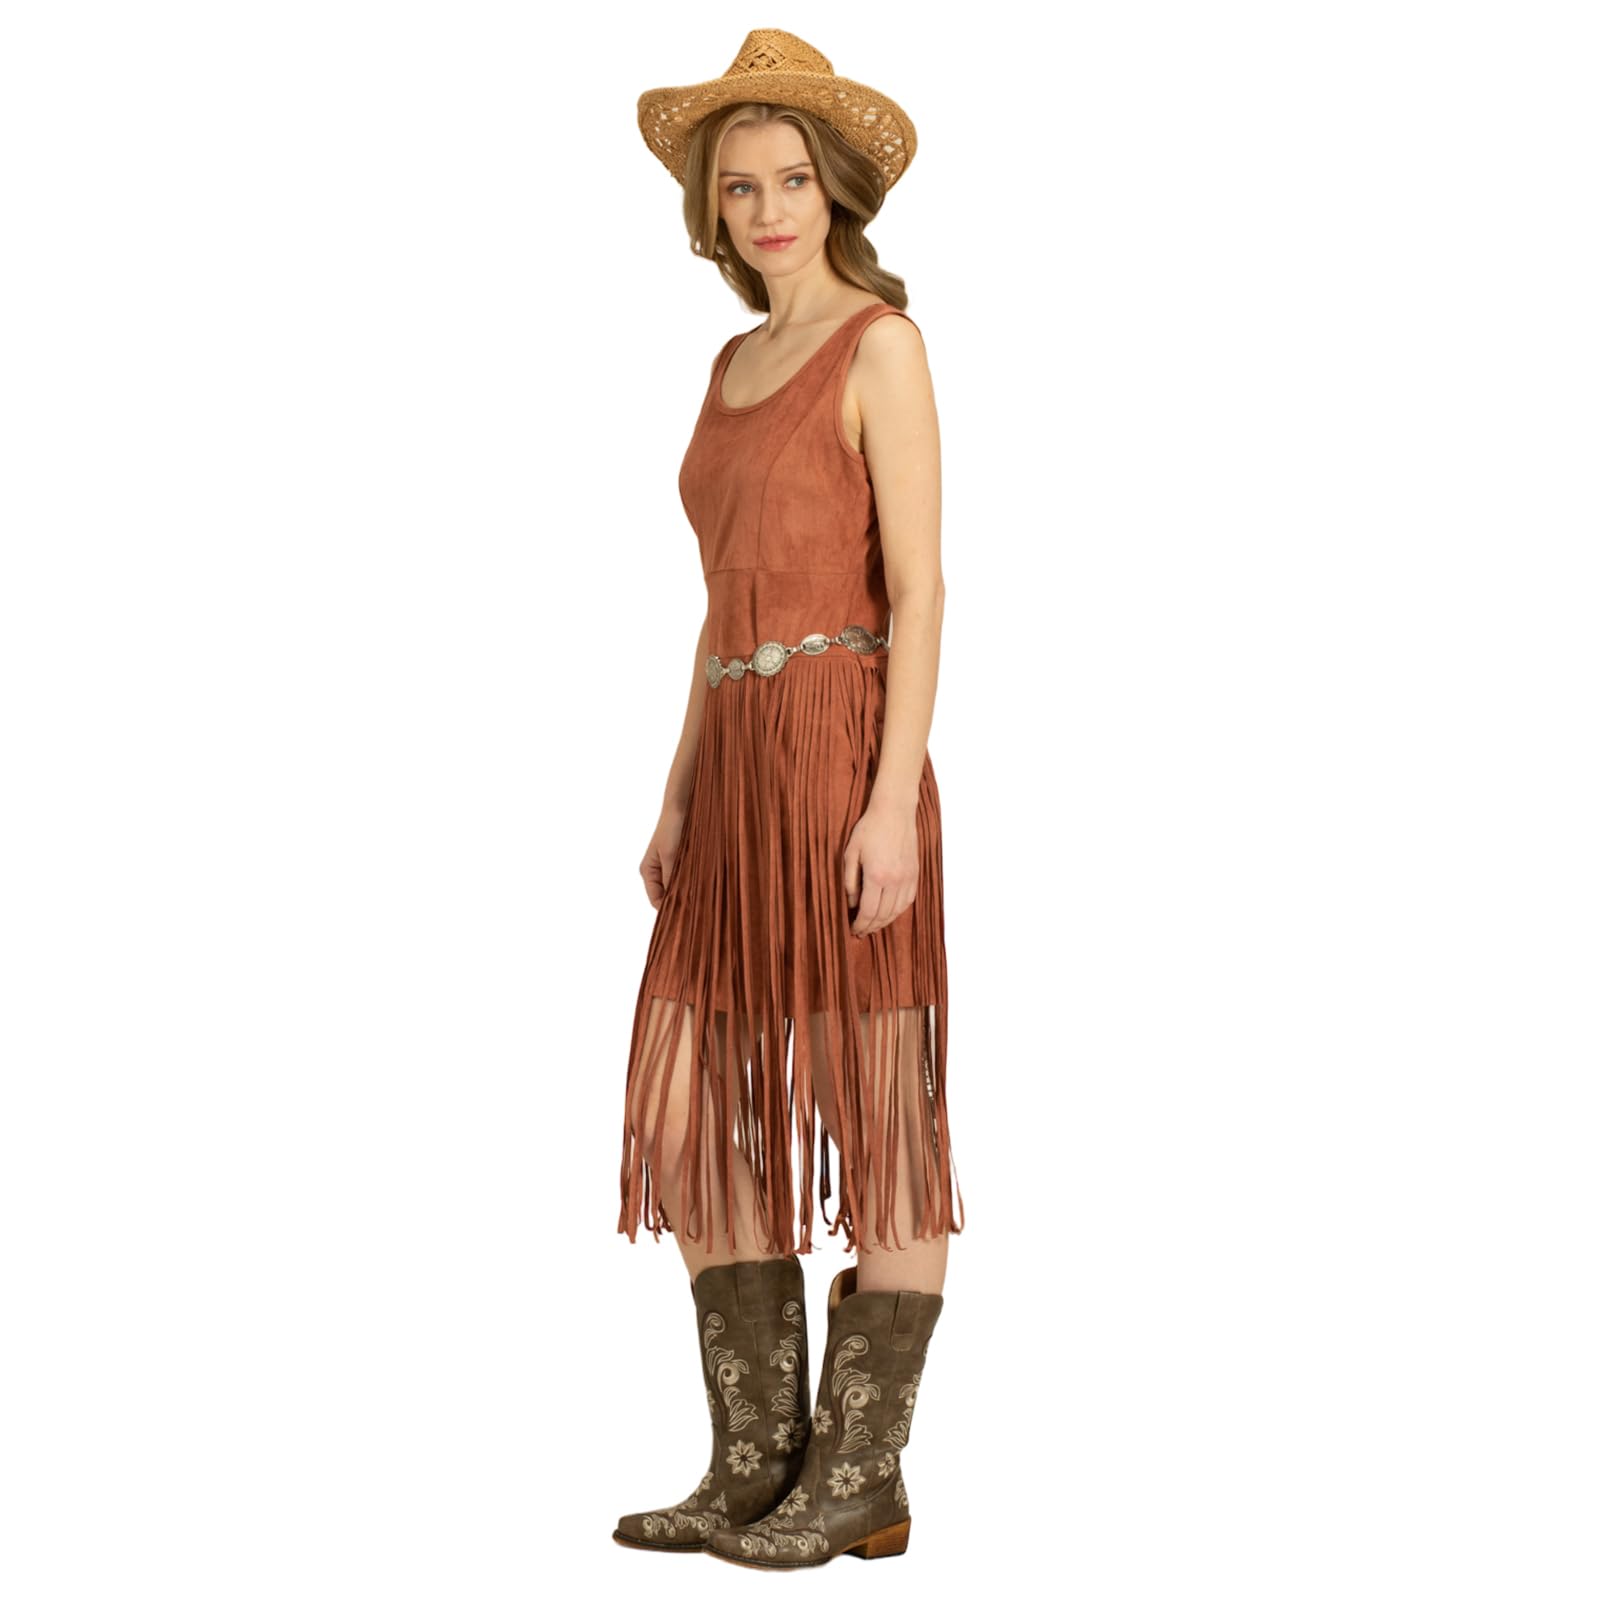 IUV Western Dress for Women Cowgirl Fringe Dresses Sleeveless Tank Tassel Skirt Country Summer Cowboy Outfit Without Belt